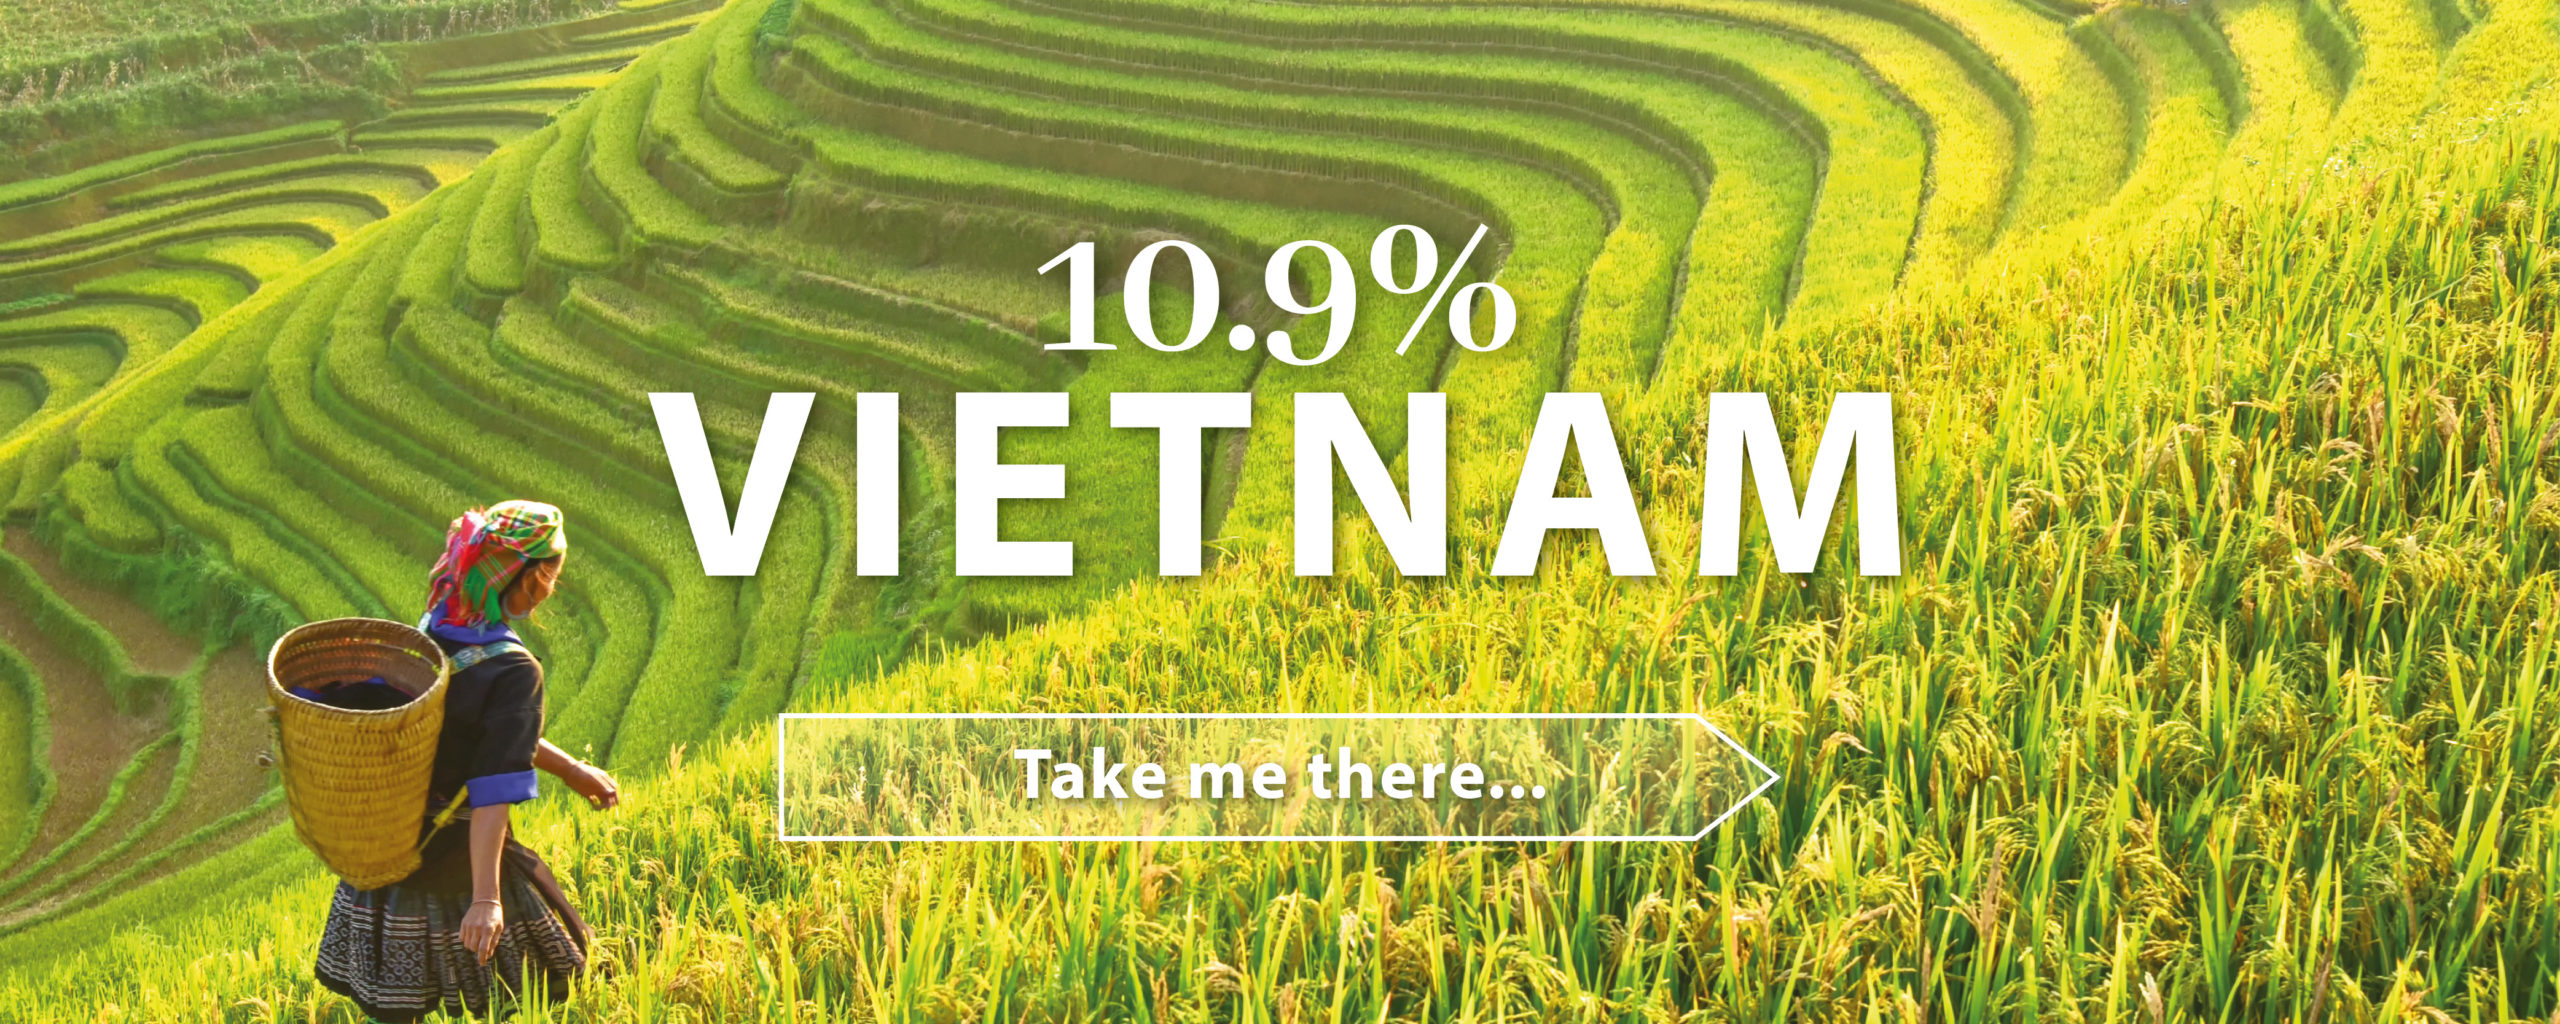 Where youre going this year_Vietnam